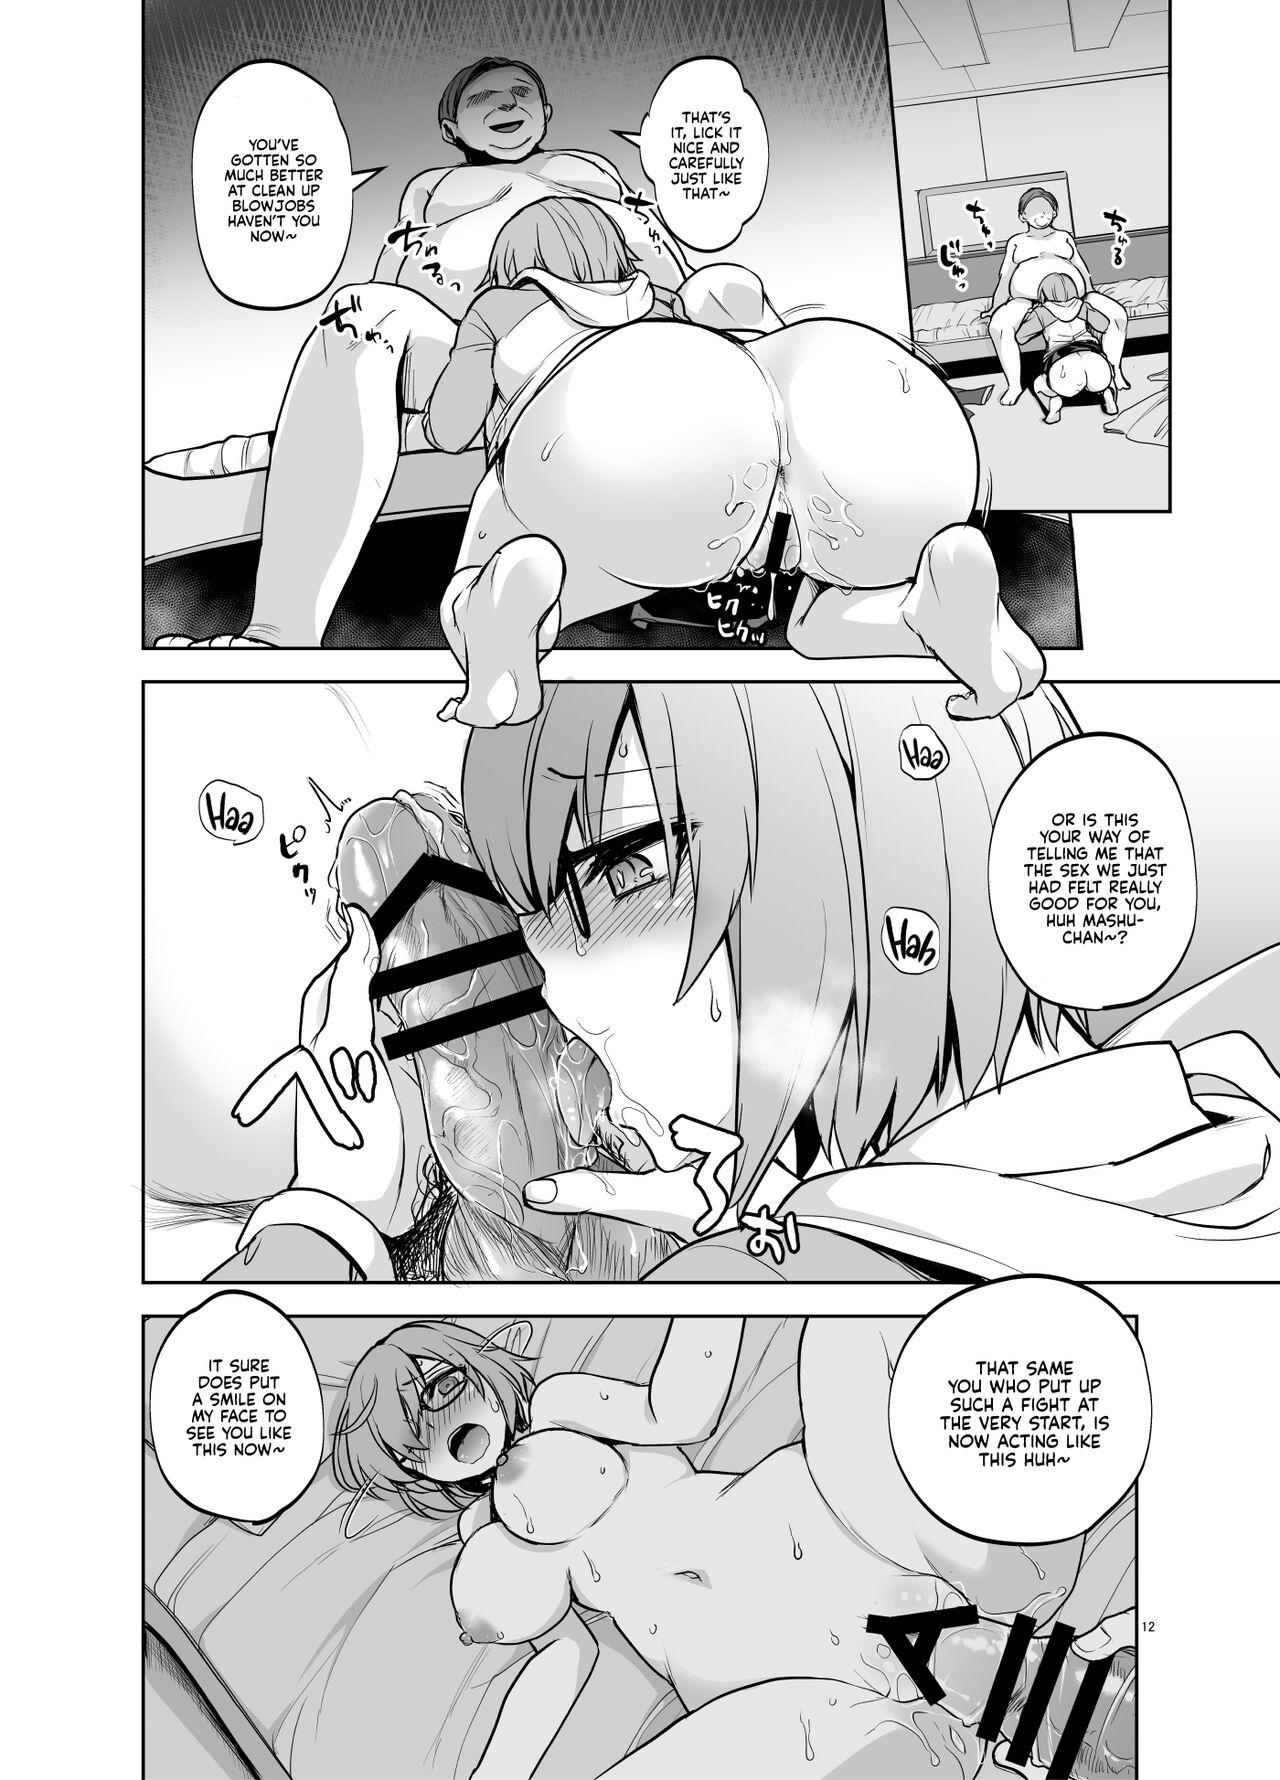 Spank Mashu Must Deal with this Pushy n' Lusty Oji-san Whenever Senpai is Busy Rayshifting! - Fate grand order Bus - Page 11